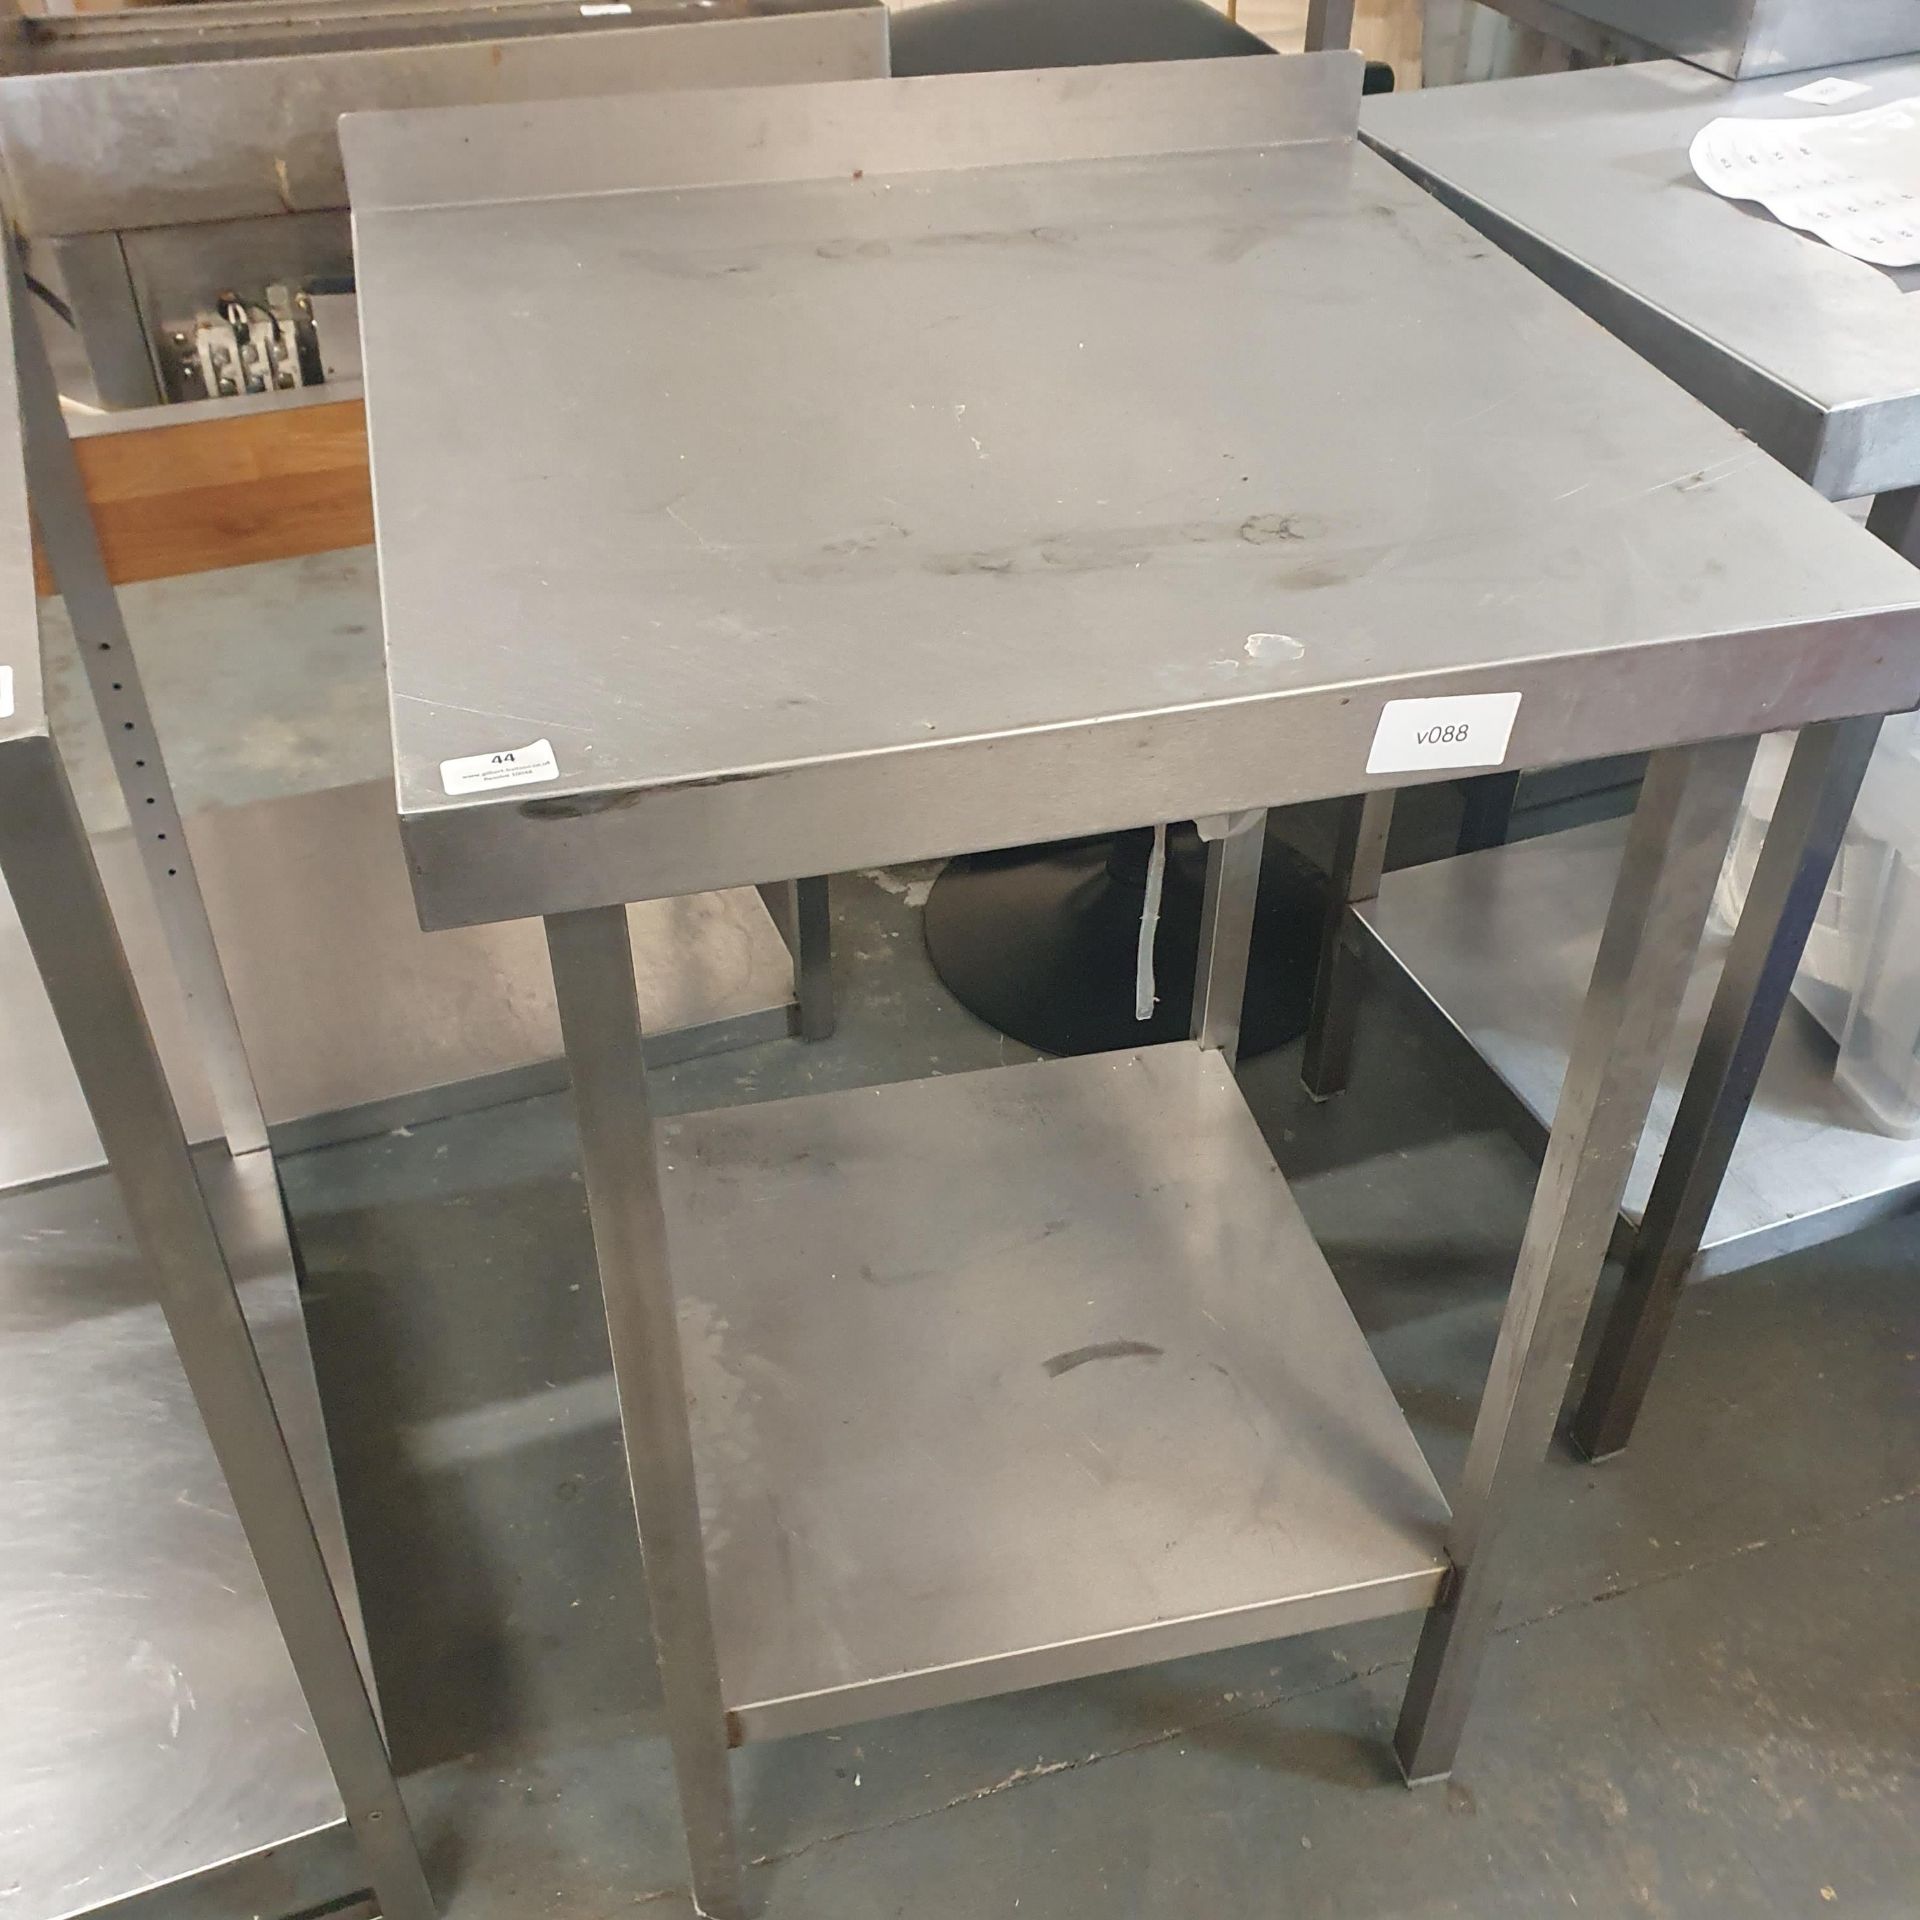 * S/S prepbench with upstand and undershelf - 600w x 600d x 900h